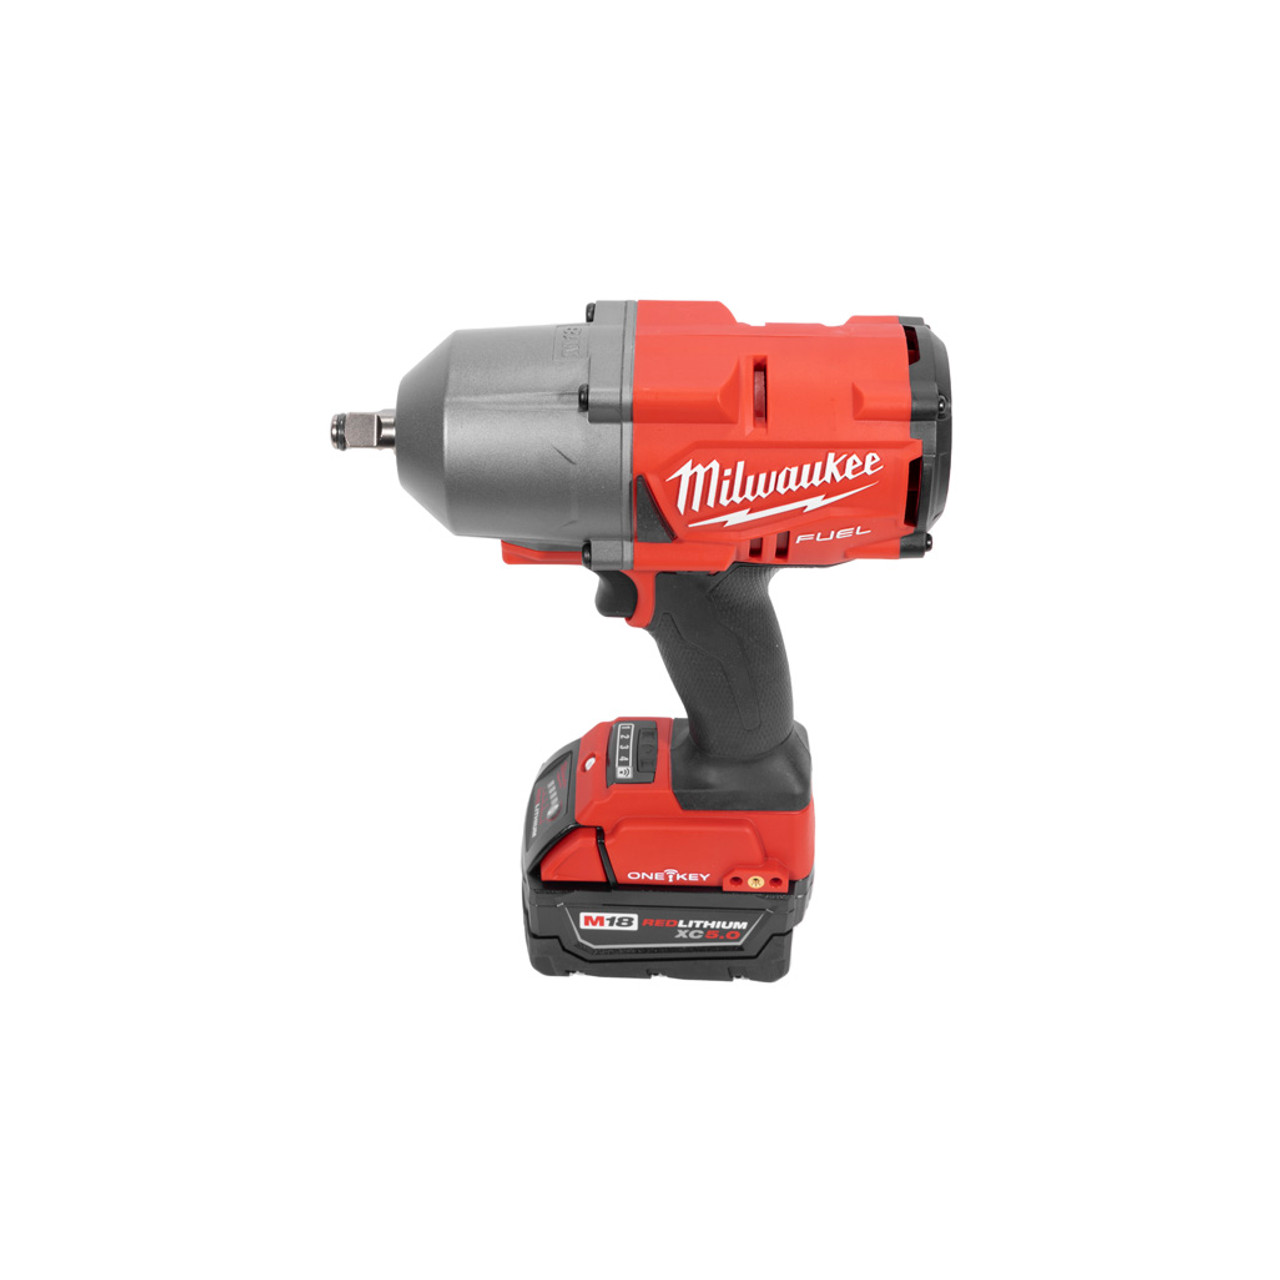 Milwaukee M18 Fuel High Torque 1/2-In Impact Wrench Kit Friction Ring 2863-22) JB Tools